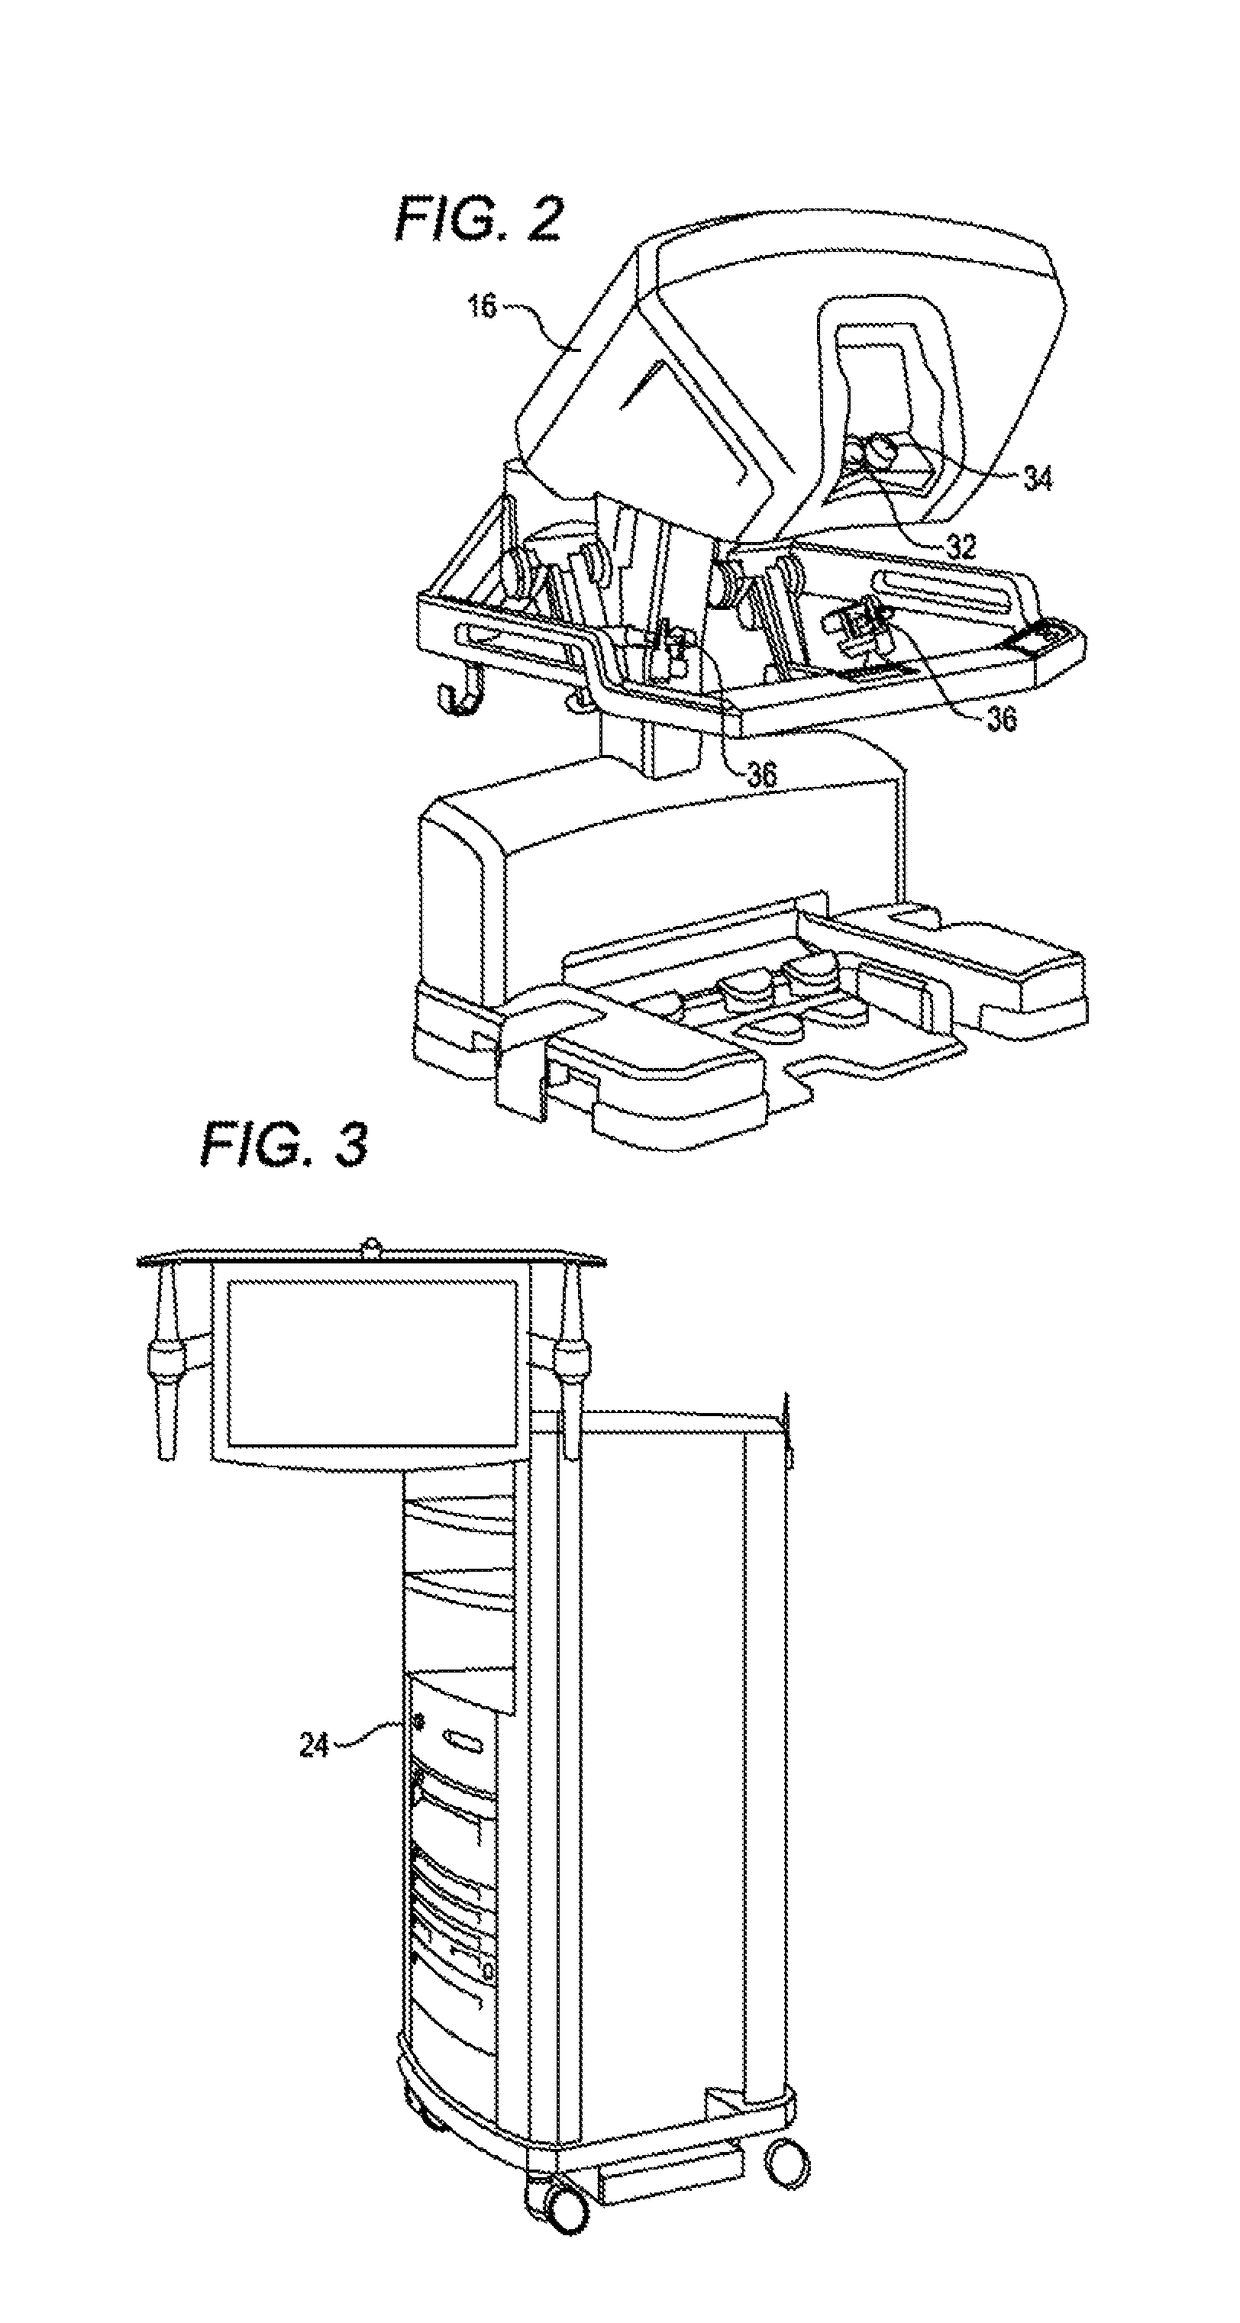 Control input accuracy for teleoperated surgical instrument